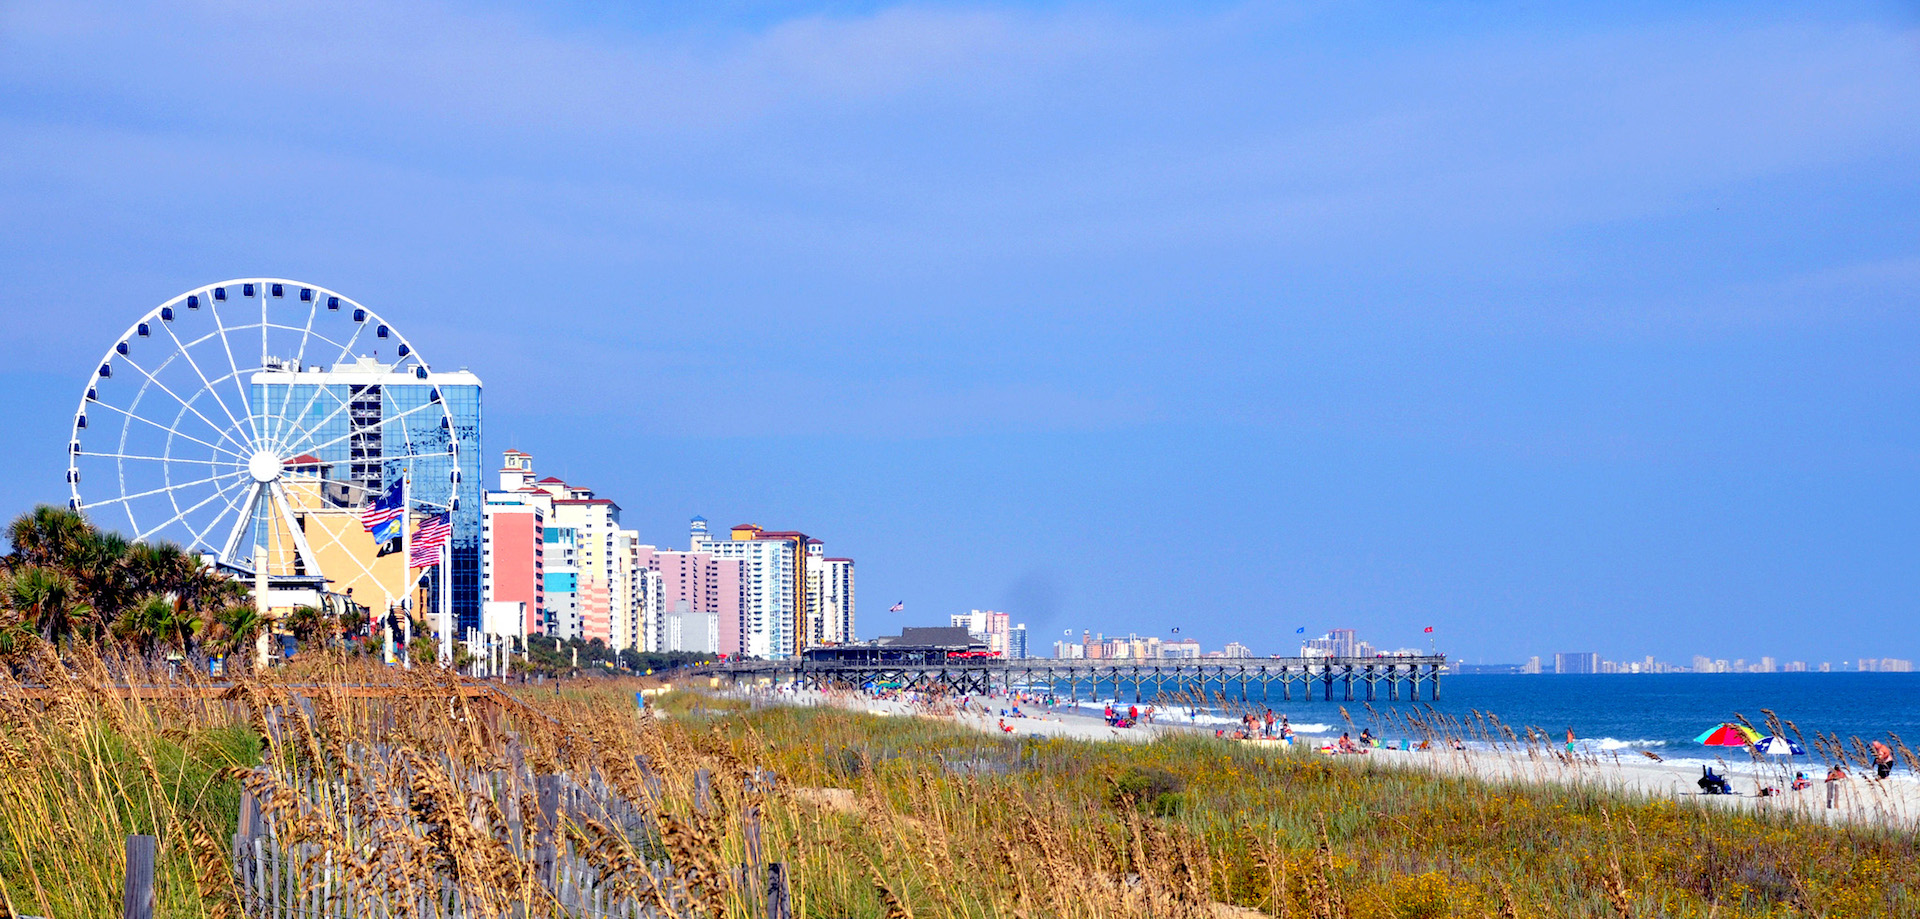 View of Myrtle Beach with ferris wheel, hotels and ocean